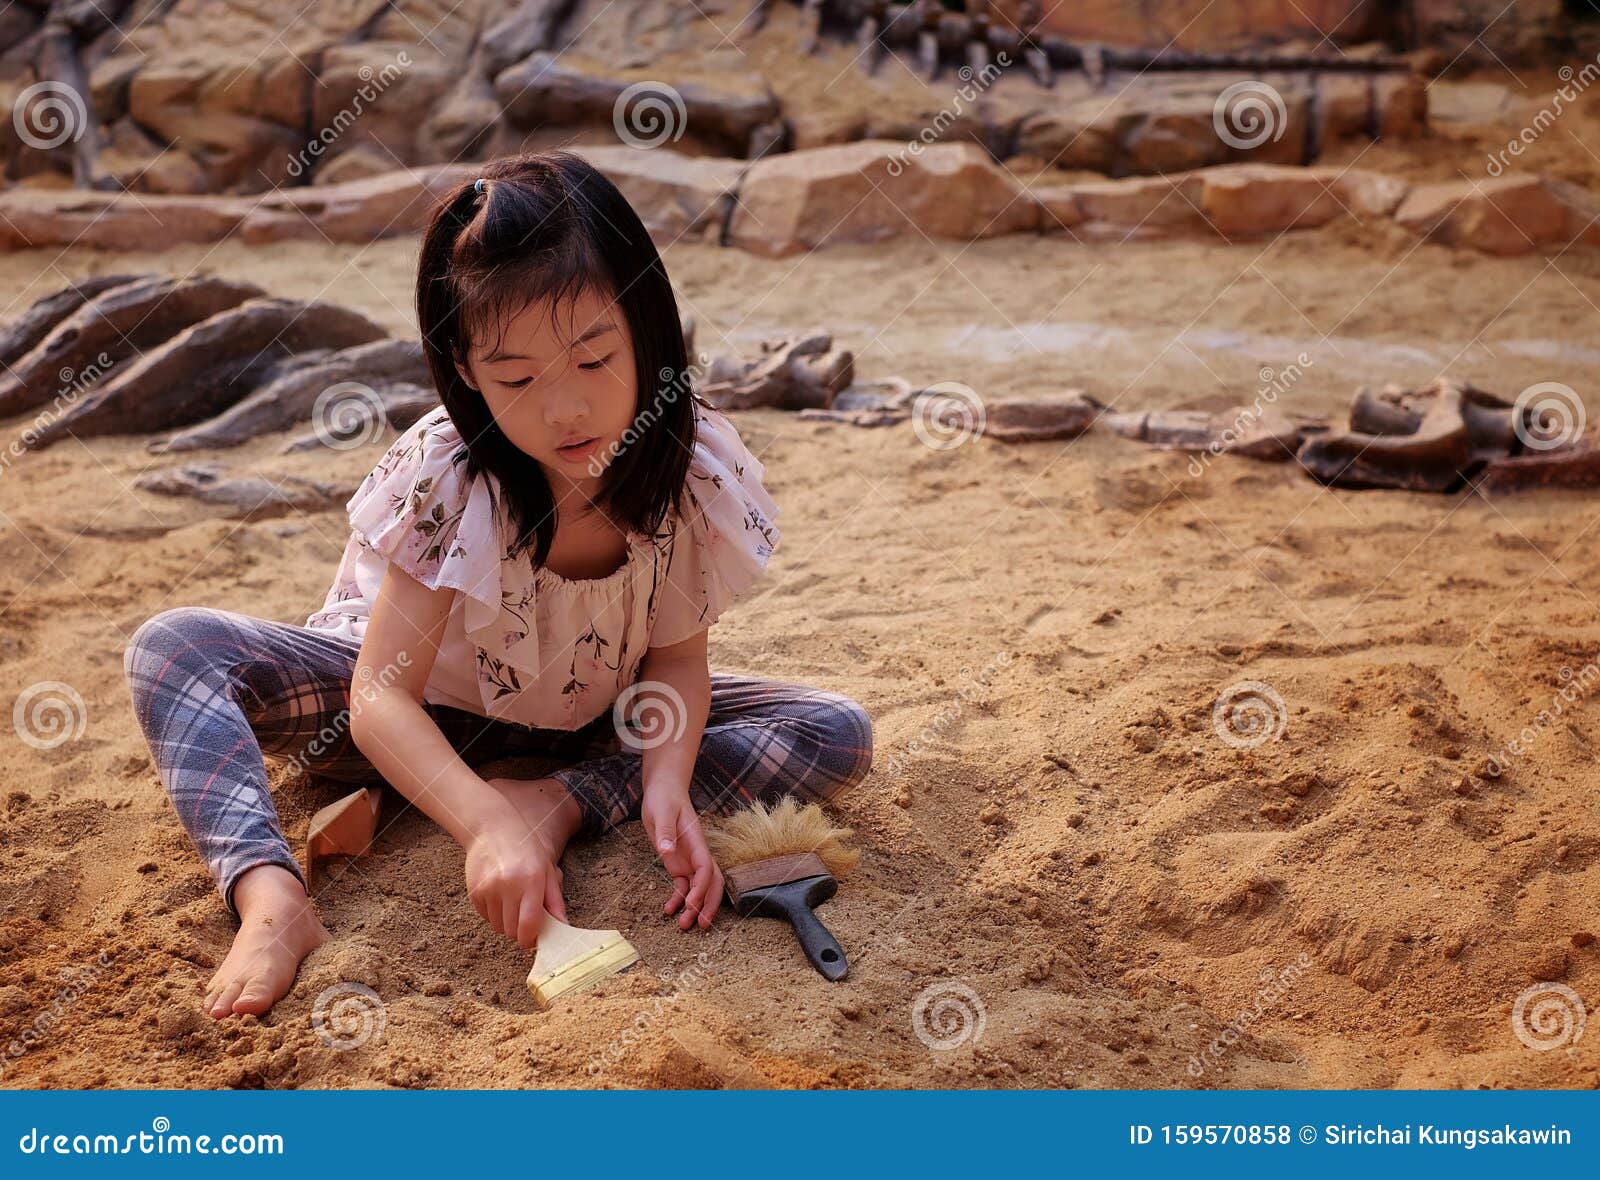 an asian girl playing in a sandbox with a modeled dinosaur fossil